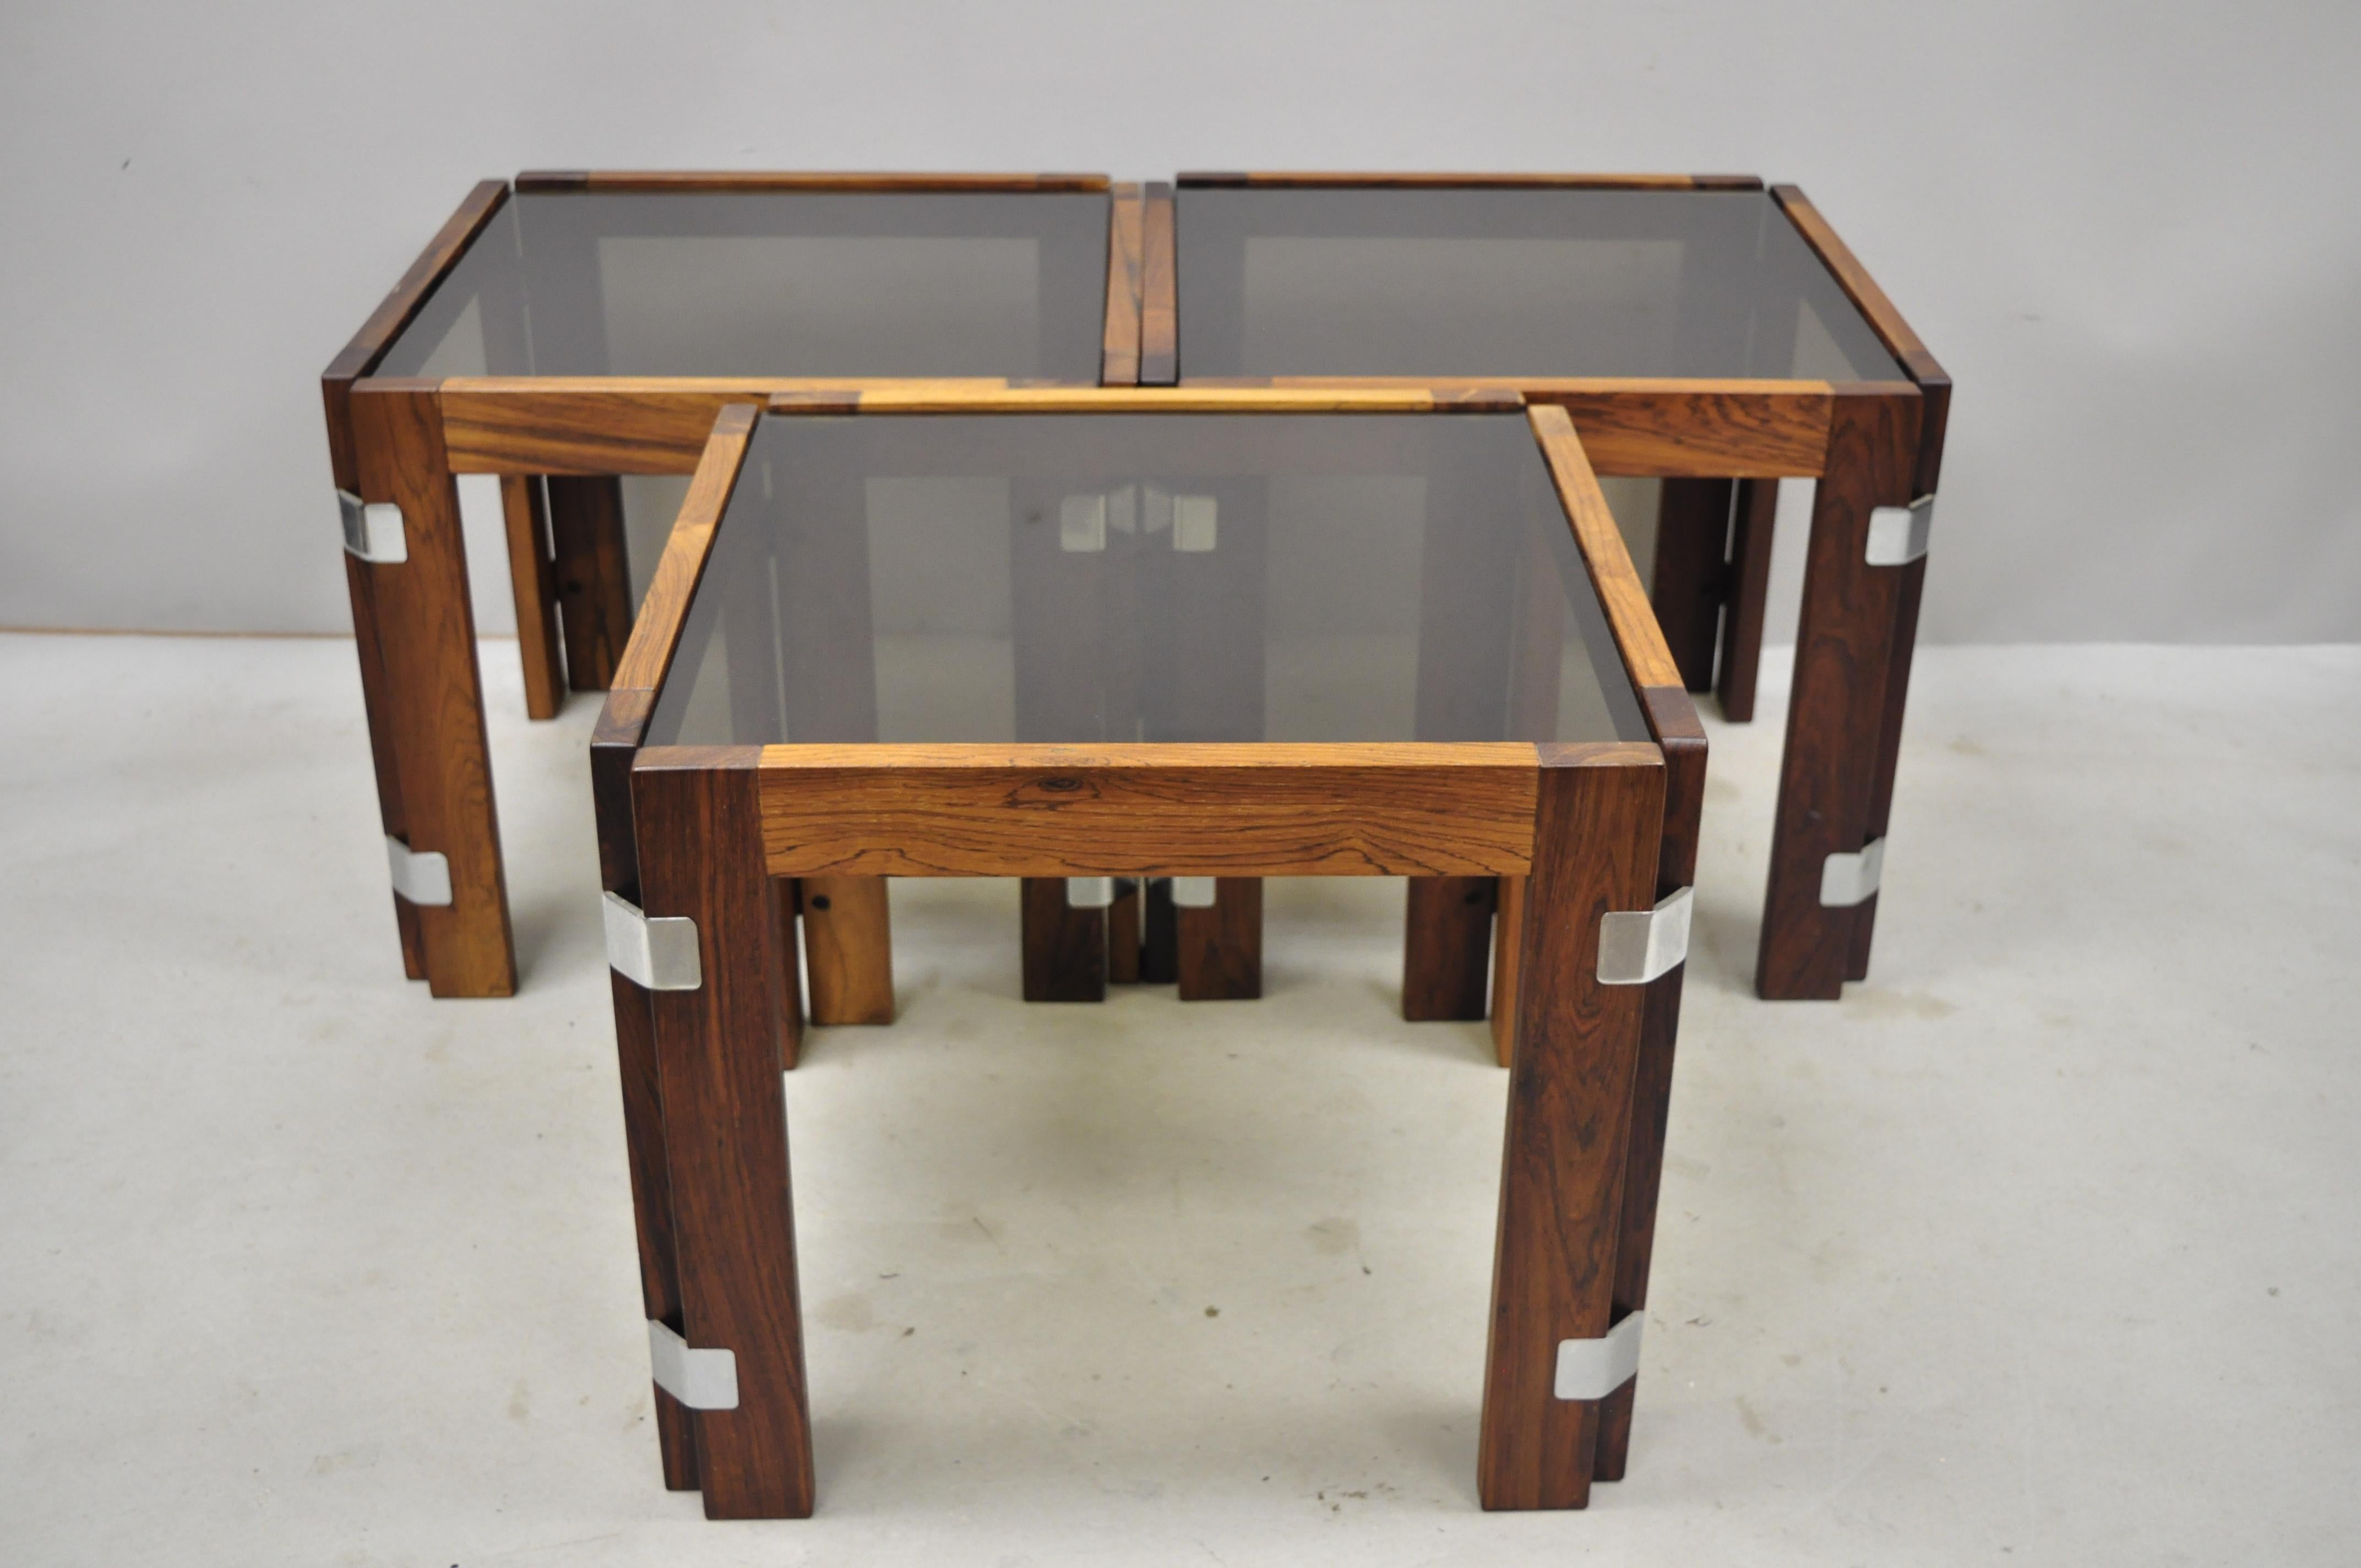 3 Midcentury Danish Modern Rosewood & Smoked Glass Side Tables by Interior Form For Sale 4